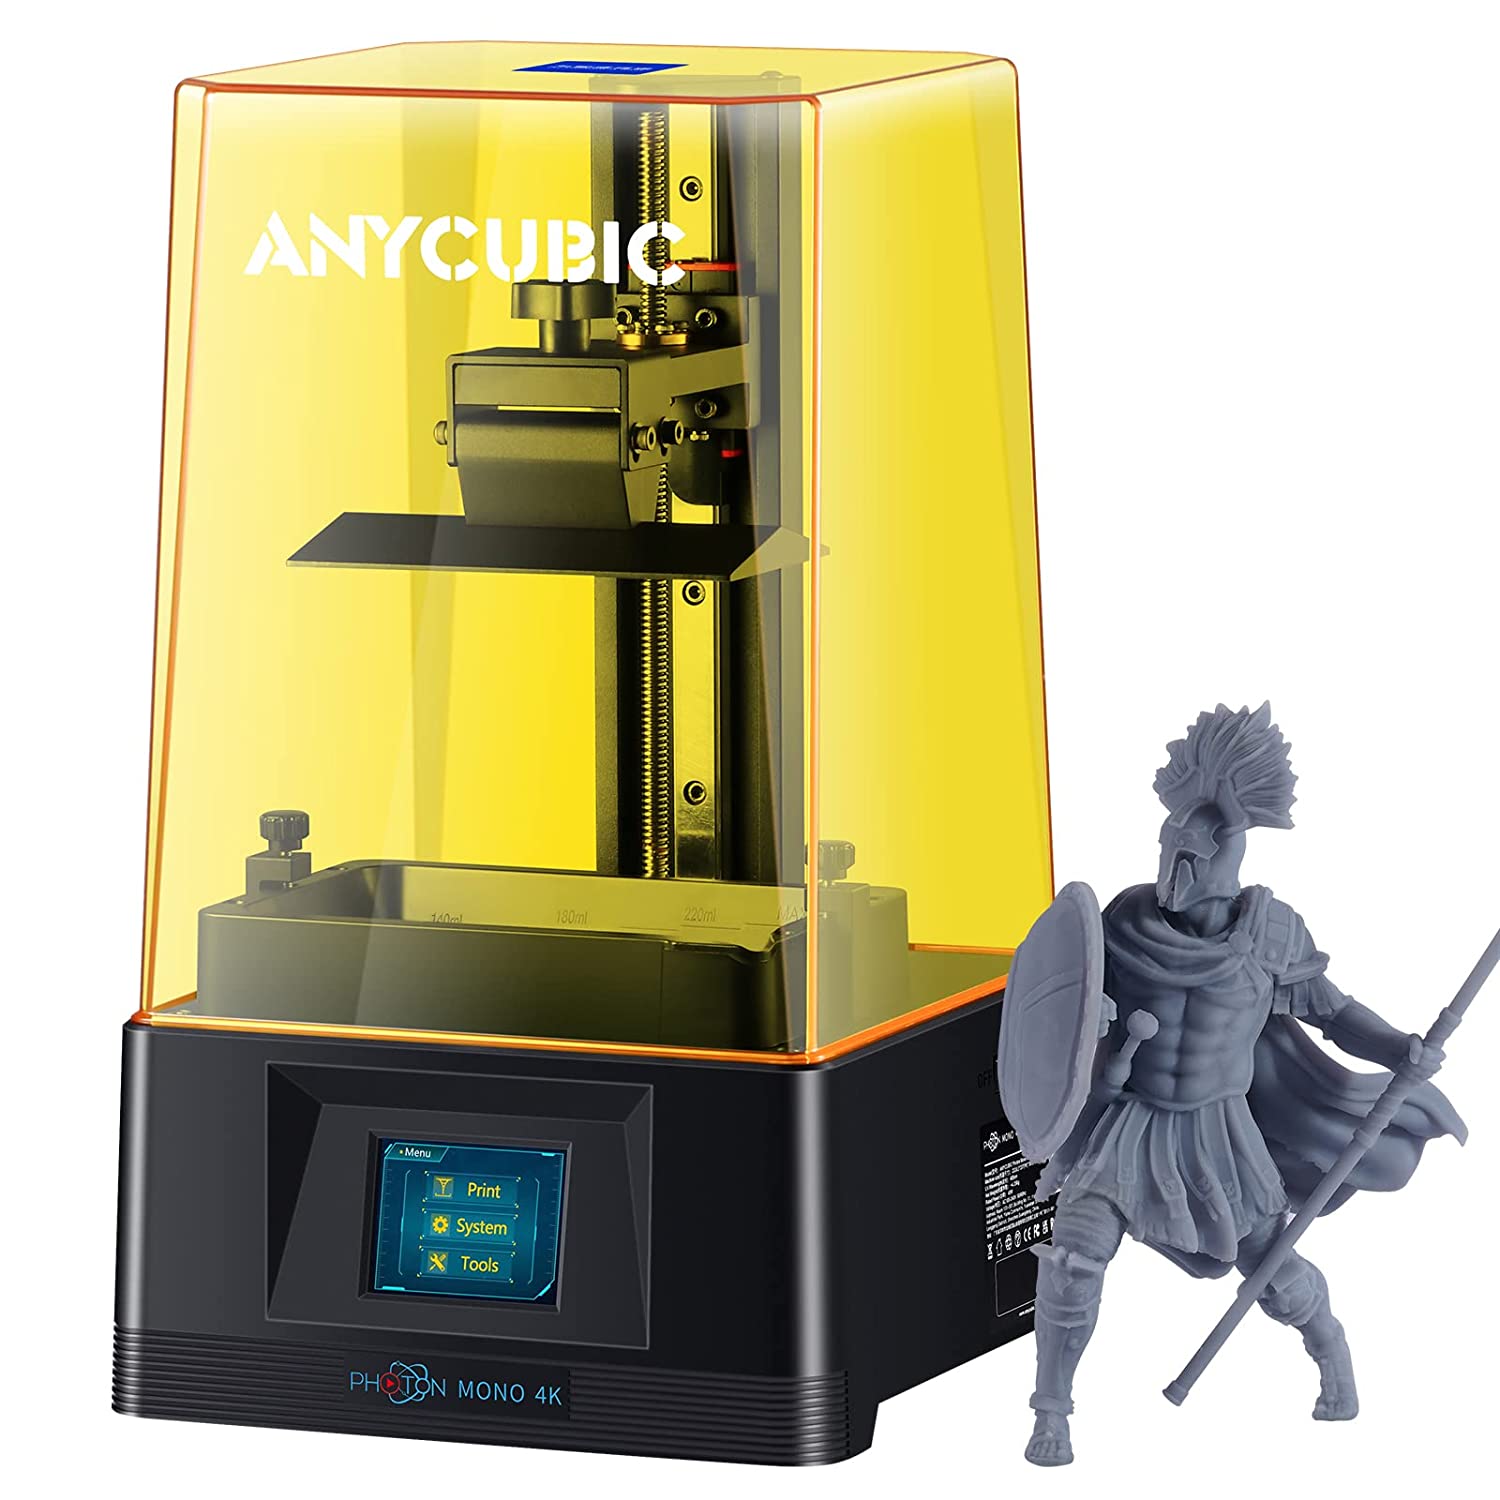 ANYCUBIC Large Screen High Resolution 3D Printer